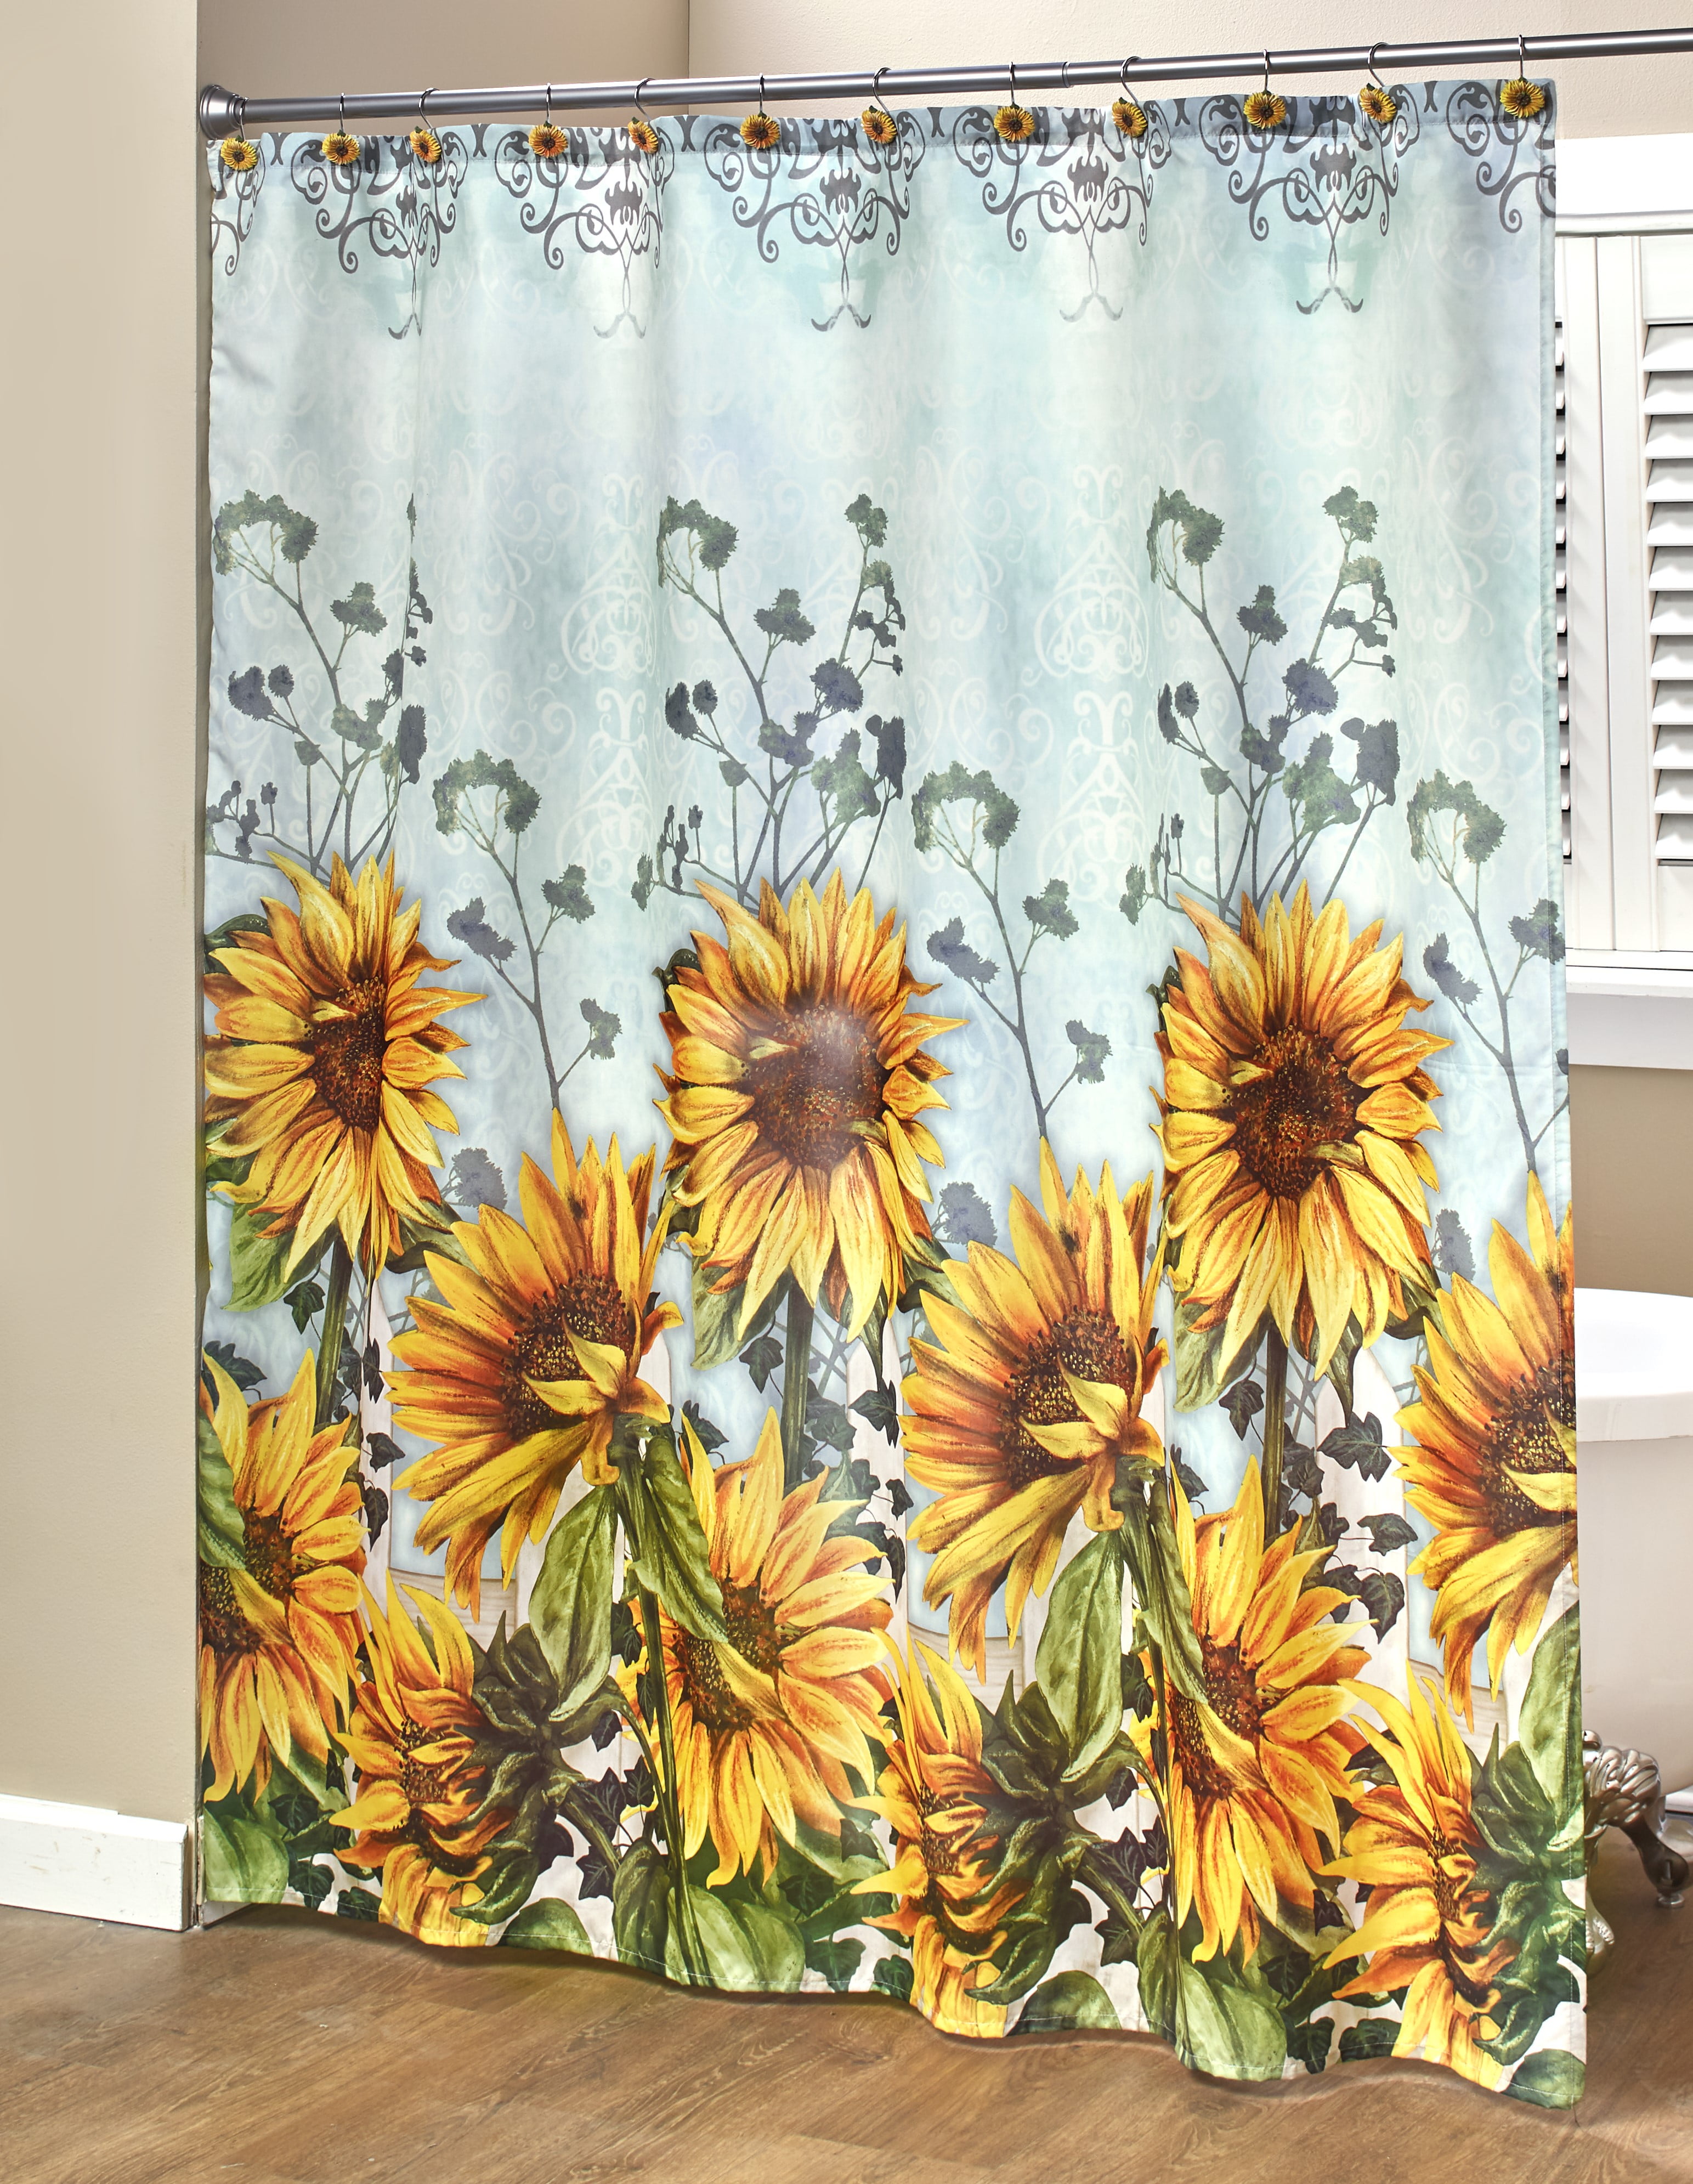 Sunshine Sunflower Butterfly Shower Curtain Rustic Plank Bathroom Accessory Sets